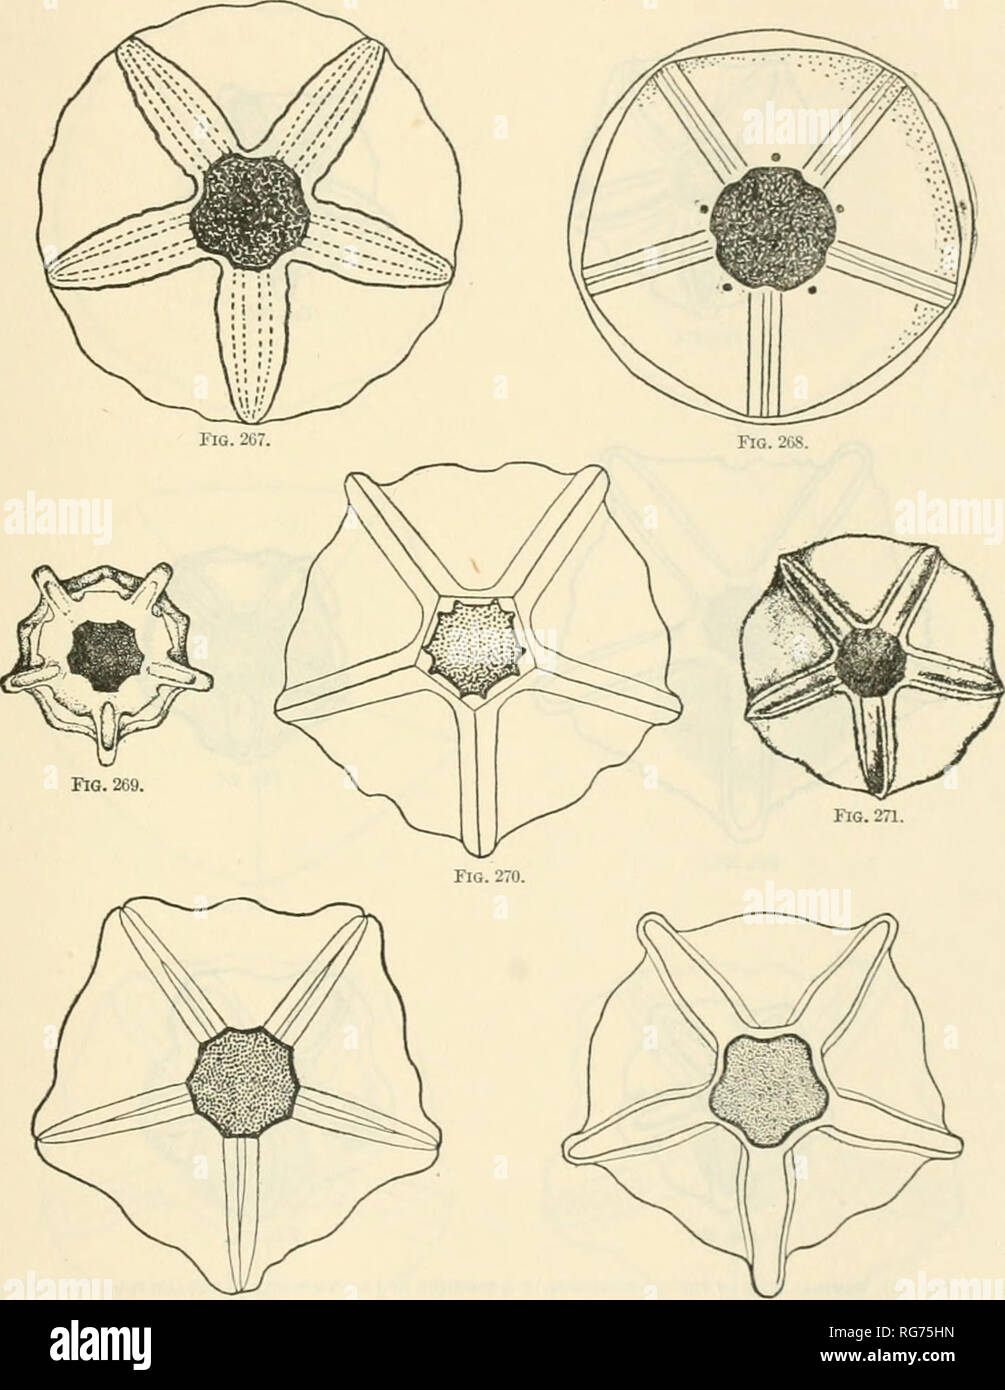 . Bulletin - United States National Museum. Science. MONOGRAPH OF THE EXISCTNG CKINOIDS. 259. Fig. 272. Flo. 273. Fias. 207-273.—267, Ventral view of tue centrodorsvl of a sPEcniES of Ptilomeira hOlleri from Sydney, New South Wales. 2a8, Ventral view of tue cestrodorsal of a specimen of Astebometra macropoda from southwestern Japan. 209, Ventral view of the centrodorsal of a specimen of Stesometra quinquecostata from the Ki Islands (AFTER p. H. Carpenter). 270, Ventral view of the centrodorsal of a specimen of Parametra orion from southern J.vPAN. 271, Ventral view of the centrodorsal of a spe Stock Photo